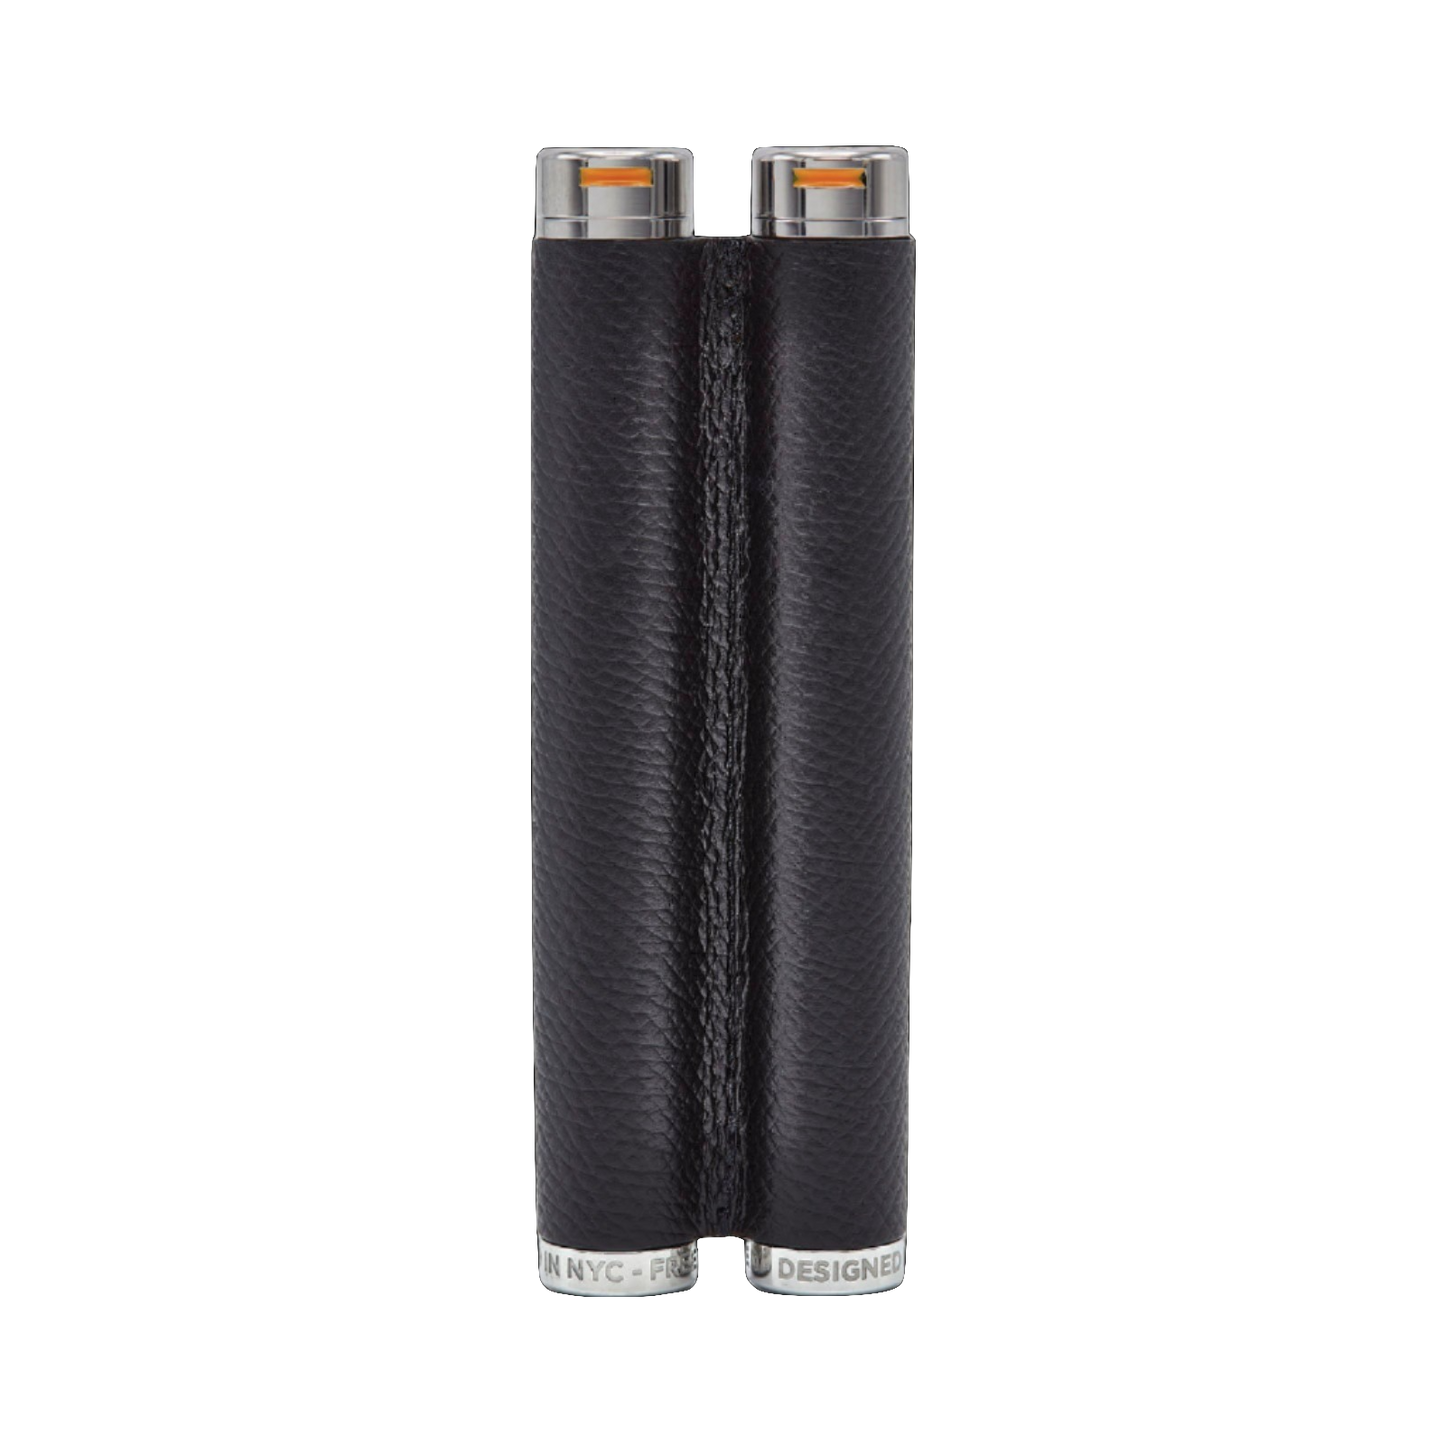 Voyager Cannabis Twin Joint or Blunt Storage Tubes